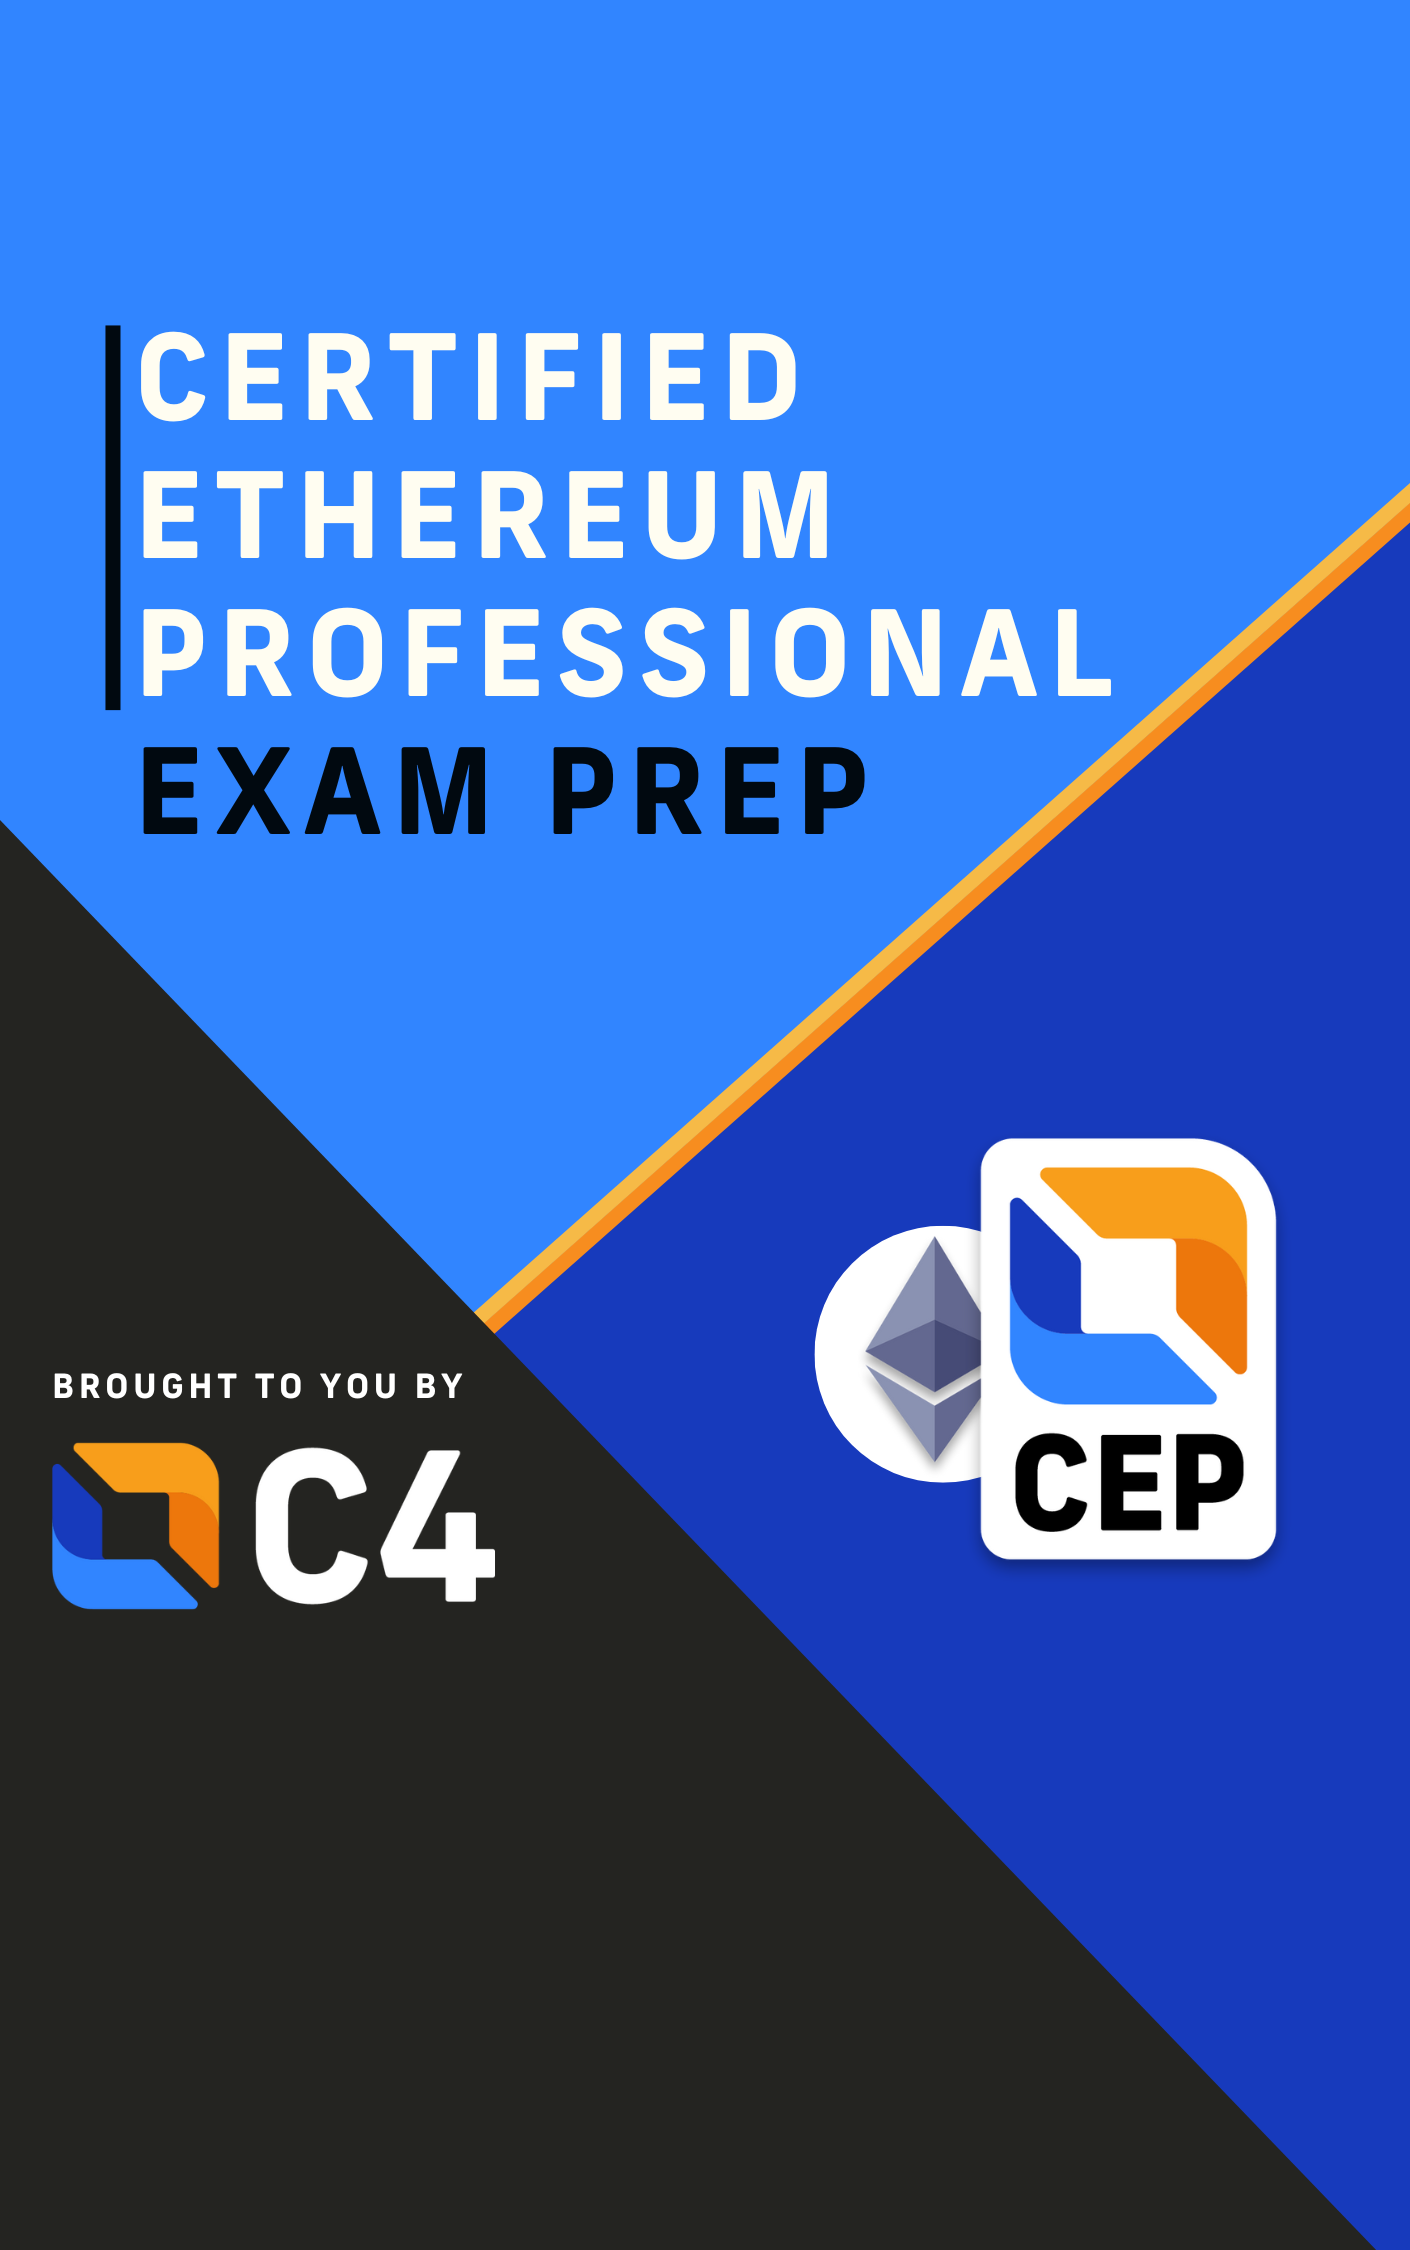 Certified Bitcoin Professional (CBP) - CryptoCurrency Certification Consortium (C4)